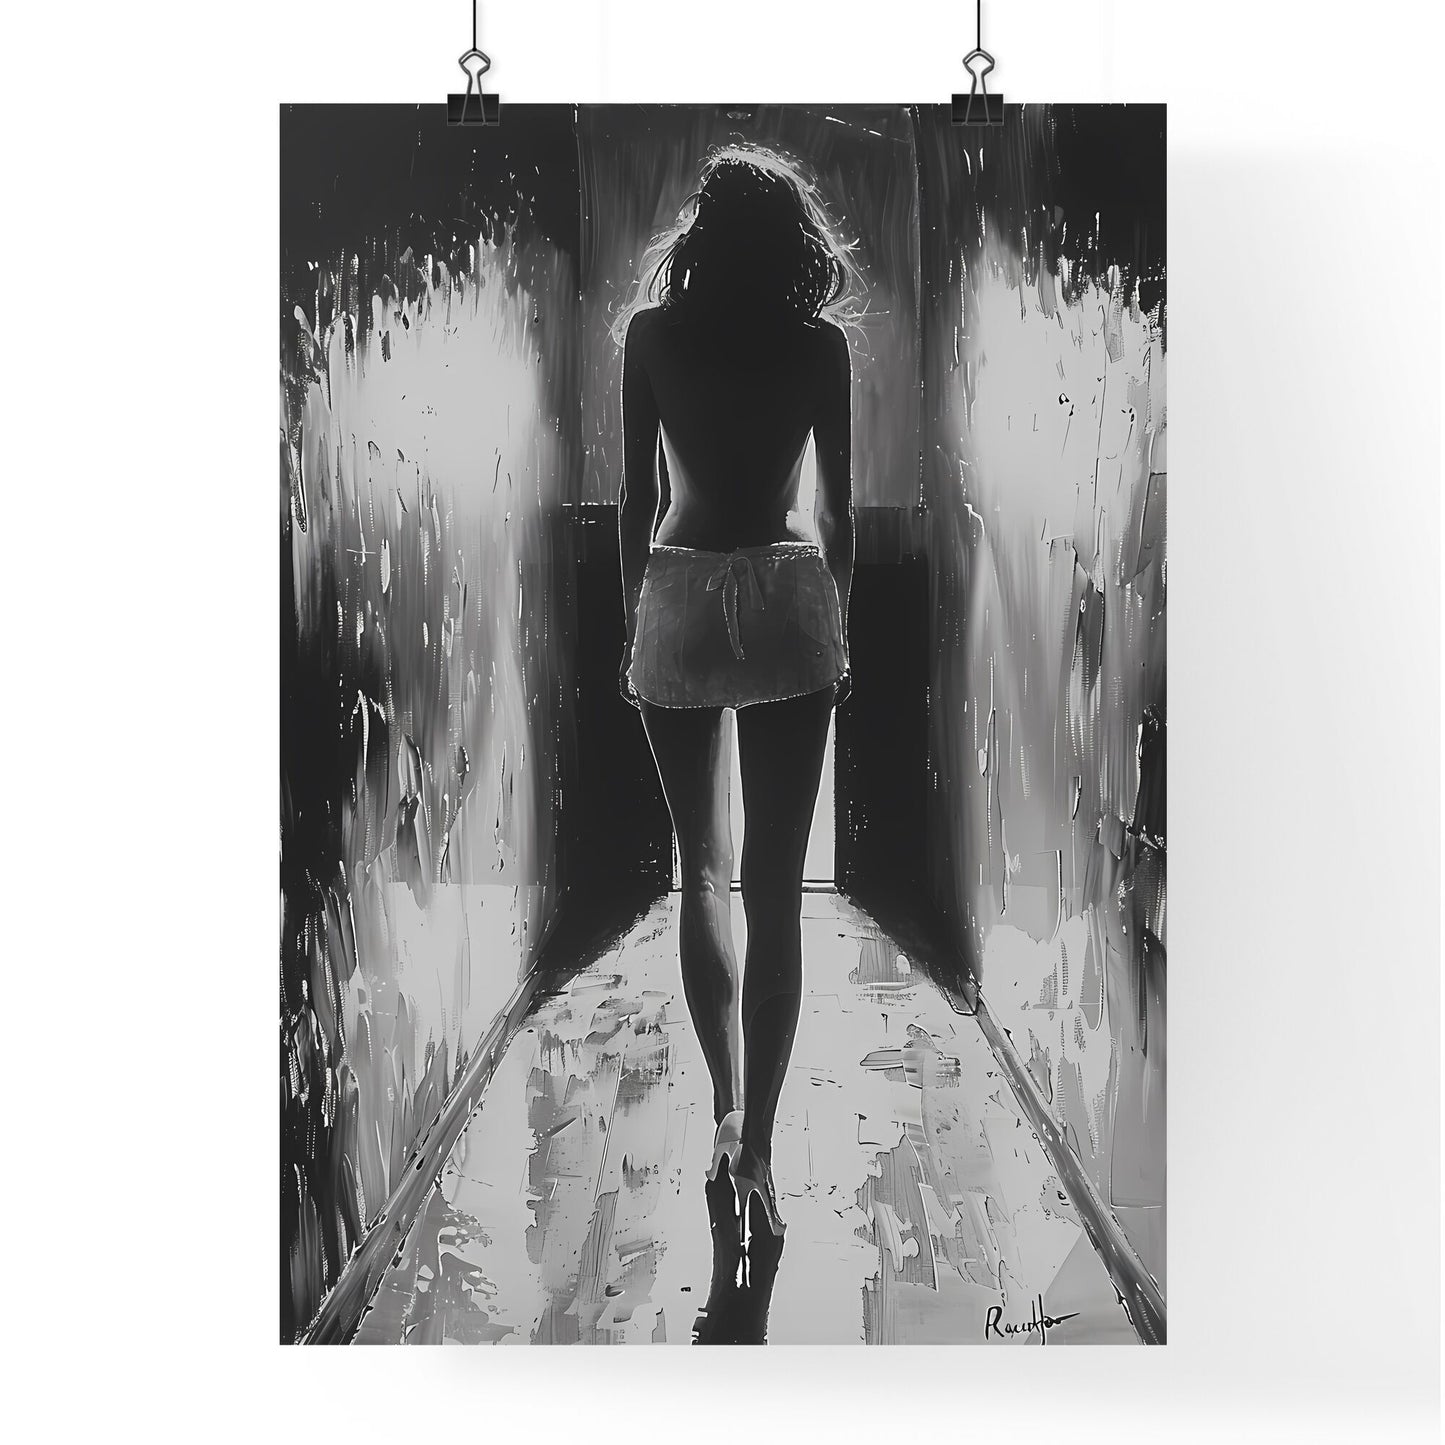 Mysteriously Elegant Monotone Femme Fatale in a Film Noir-Inspired Painting Default Title